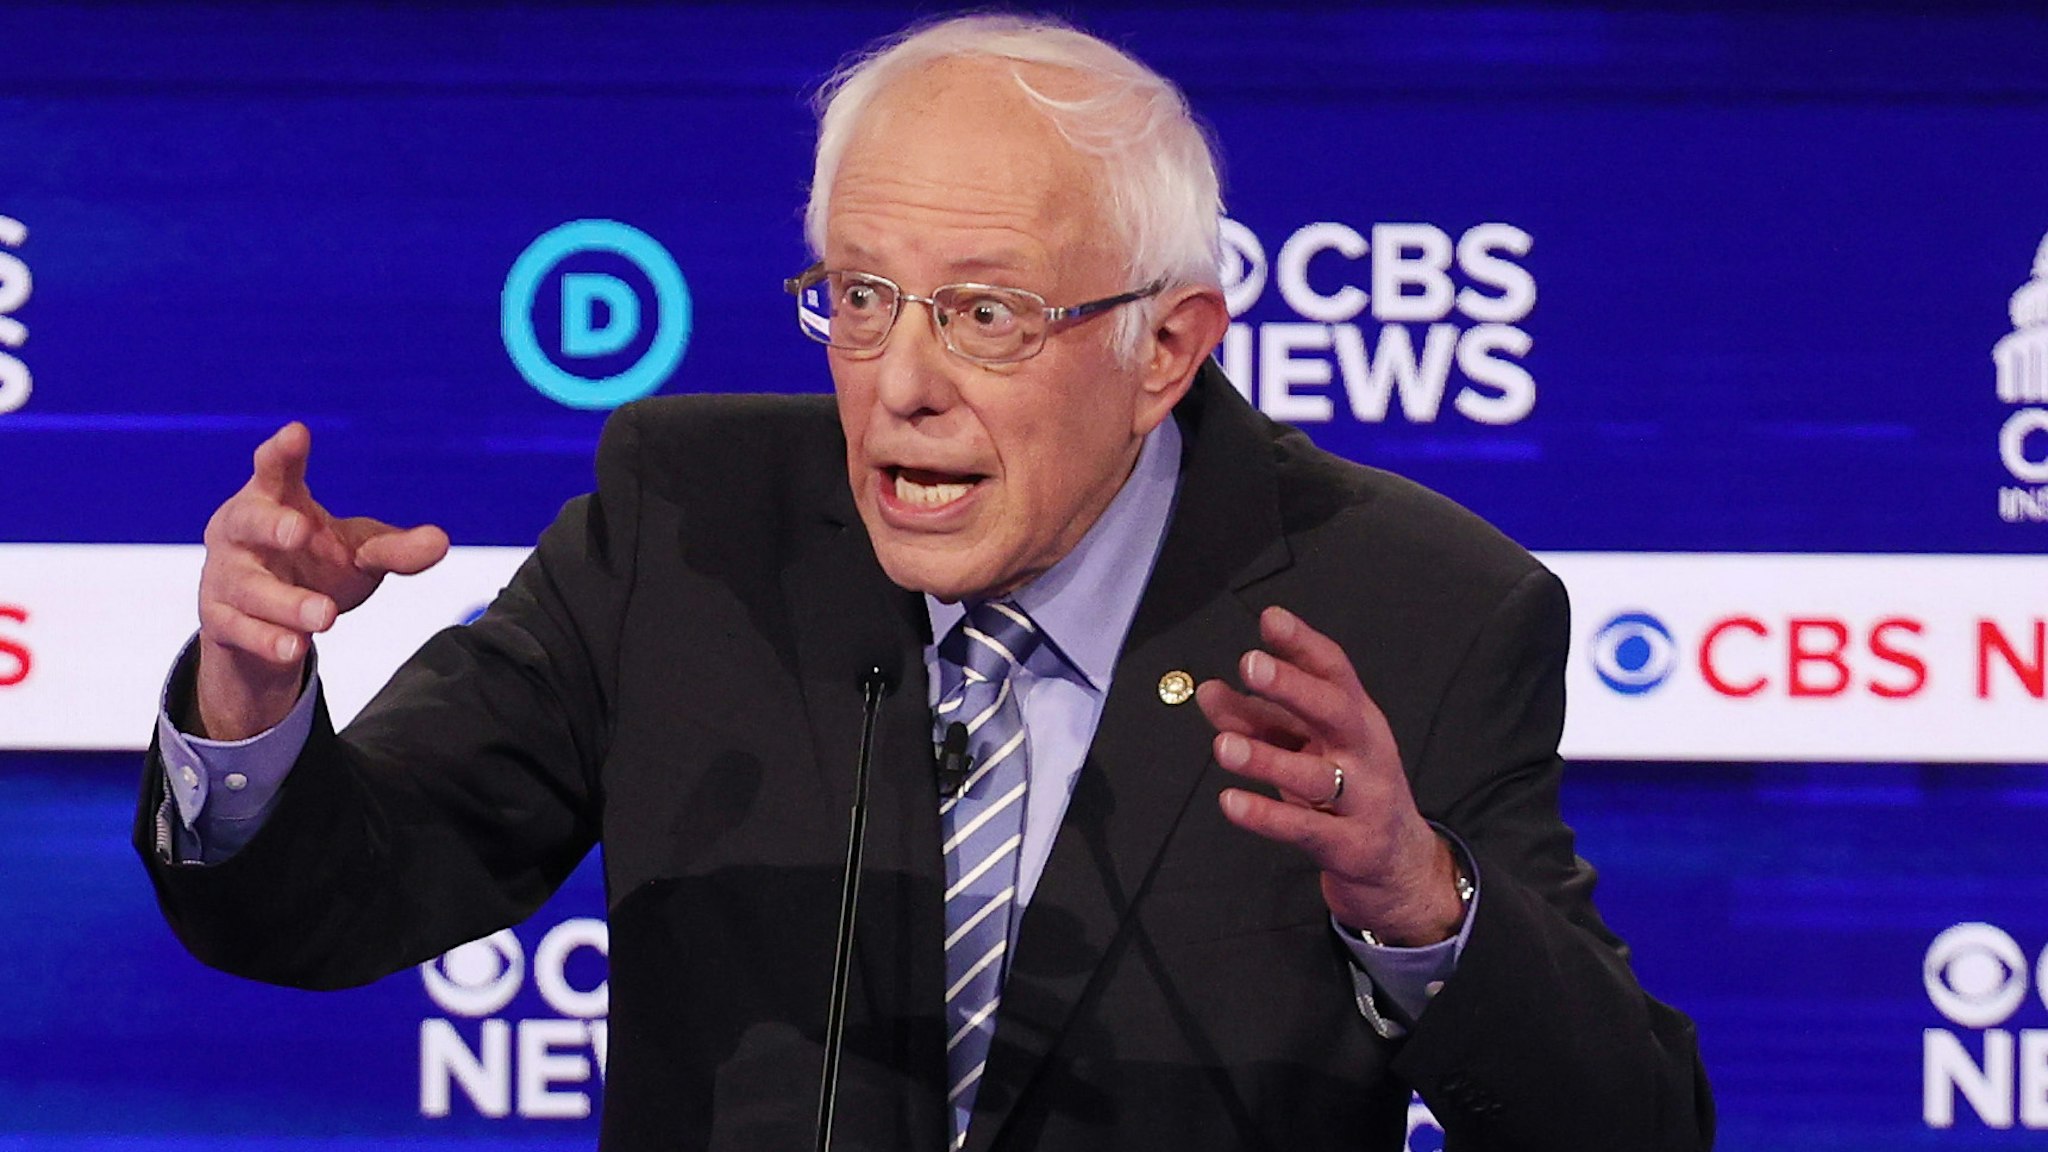 CHARLESTON, SOUTH CAROLINA - FEBRUARY 25: Democratic presidential candidate Sen. Bernie Sanders (I-VT) speaks during the Democratic presidential primary debate at the Charleston Gaillard Center on February 25, 2020 in Charleston, South Carolina. Seven candidates qualified for the debate, hosted by CBS News and Congressional Black Caucus Institute, ahead of South Carolina’s primary in four days.